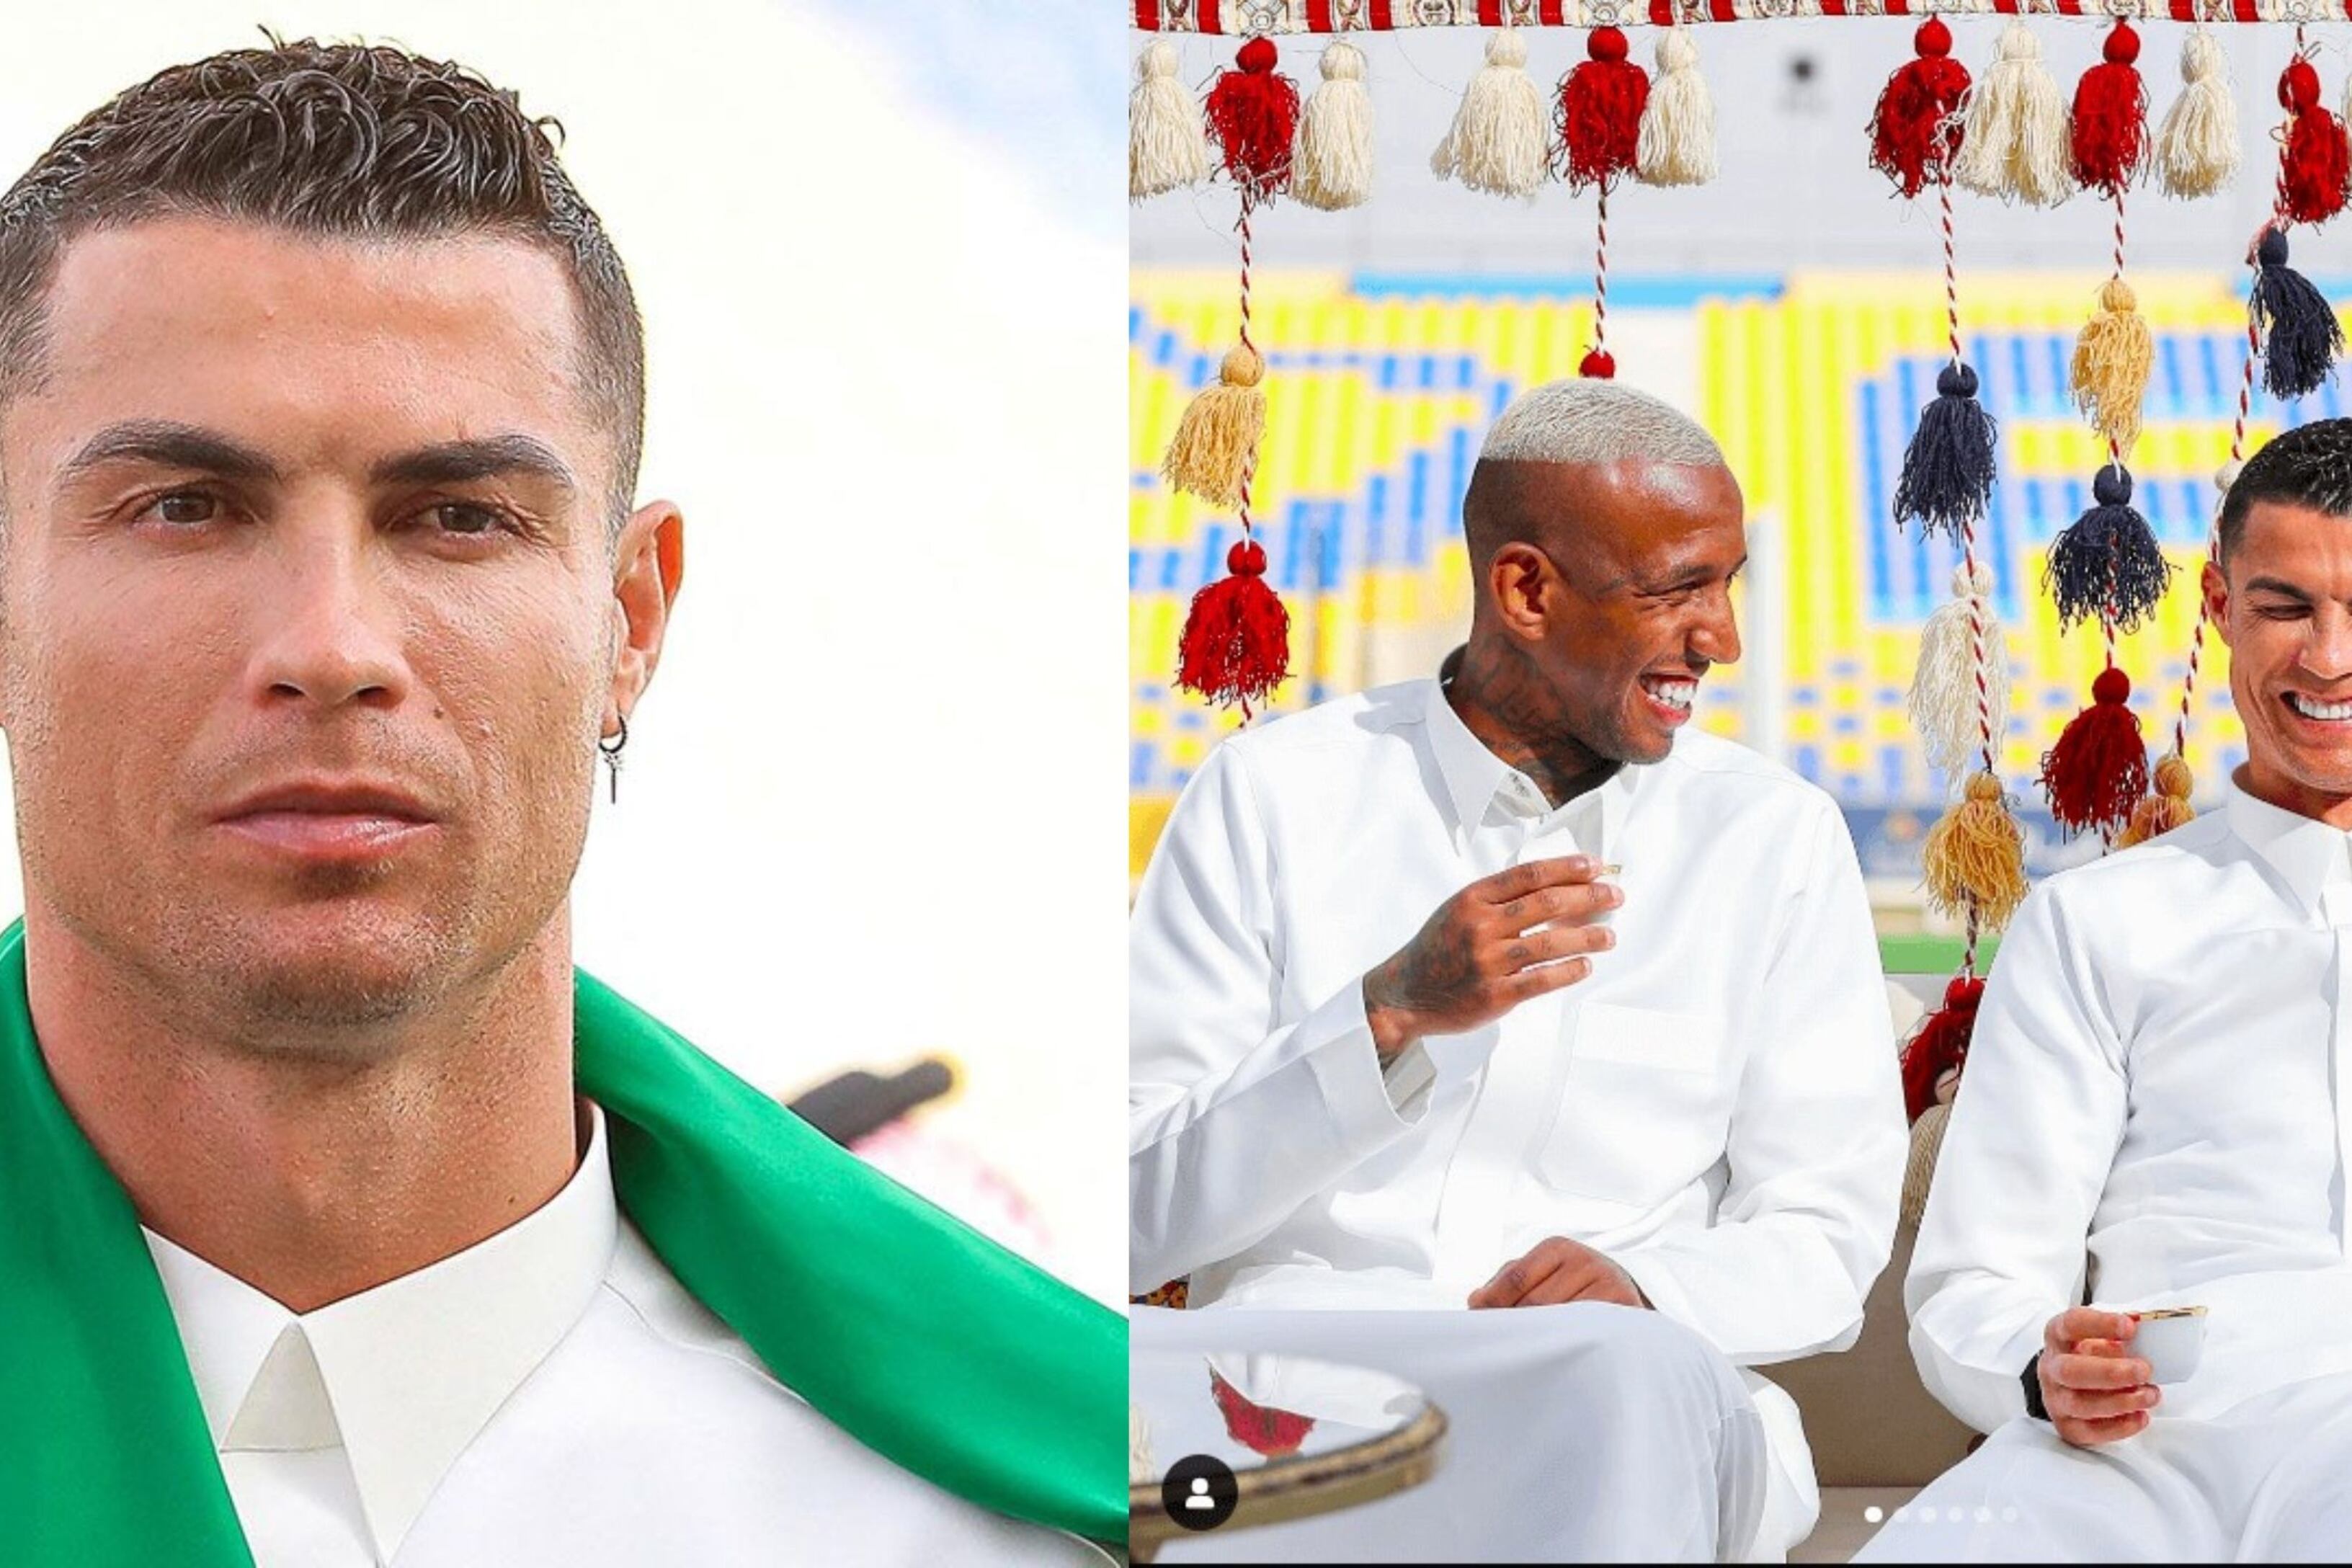 While they talk about the arrival of Messi in Arabia, the Arab ceremony of Cristiano Ronaldo that impressed